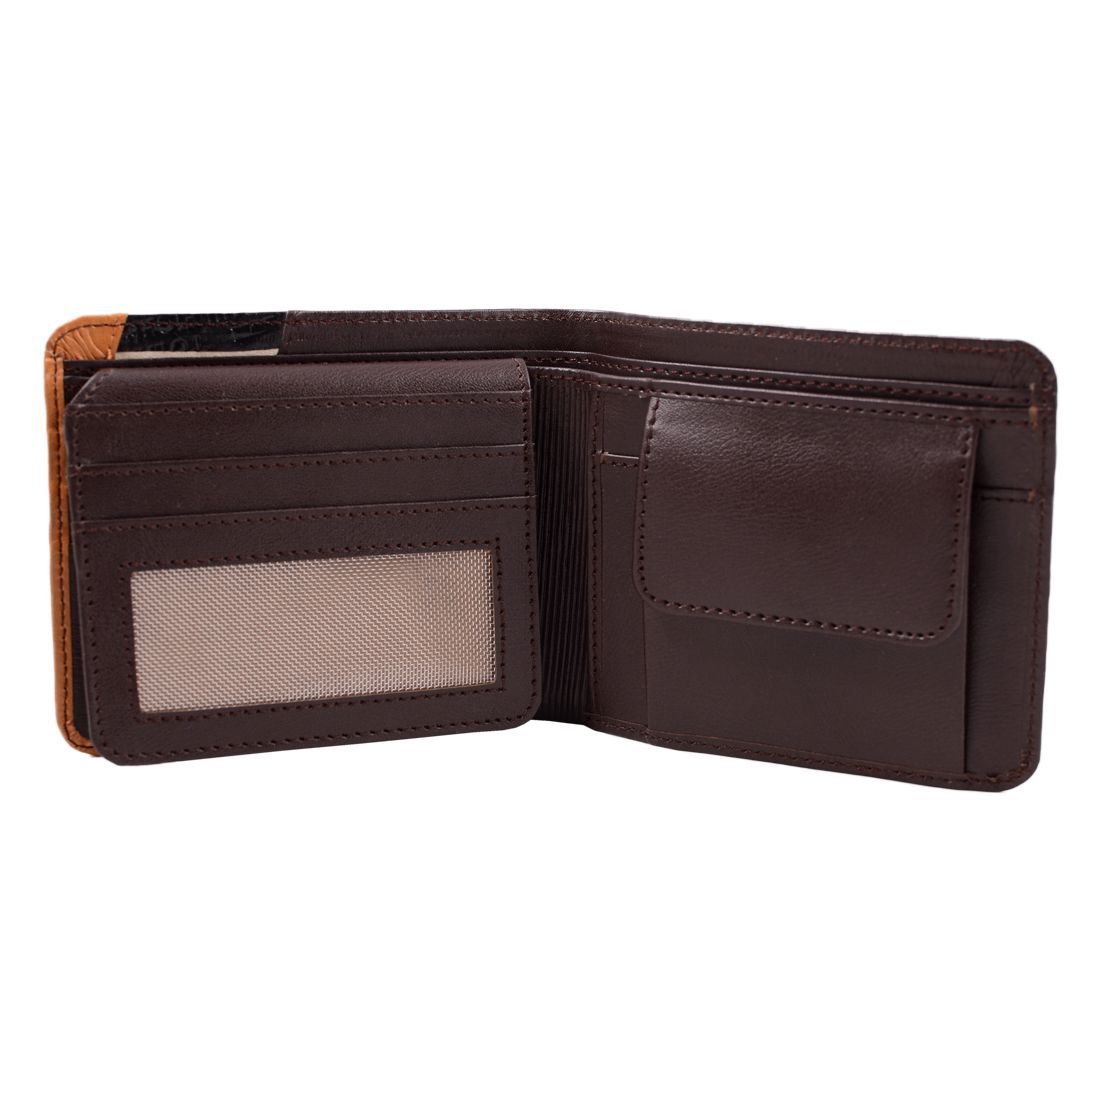 tommy hilfiger leather brown casual regular wallet